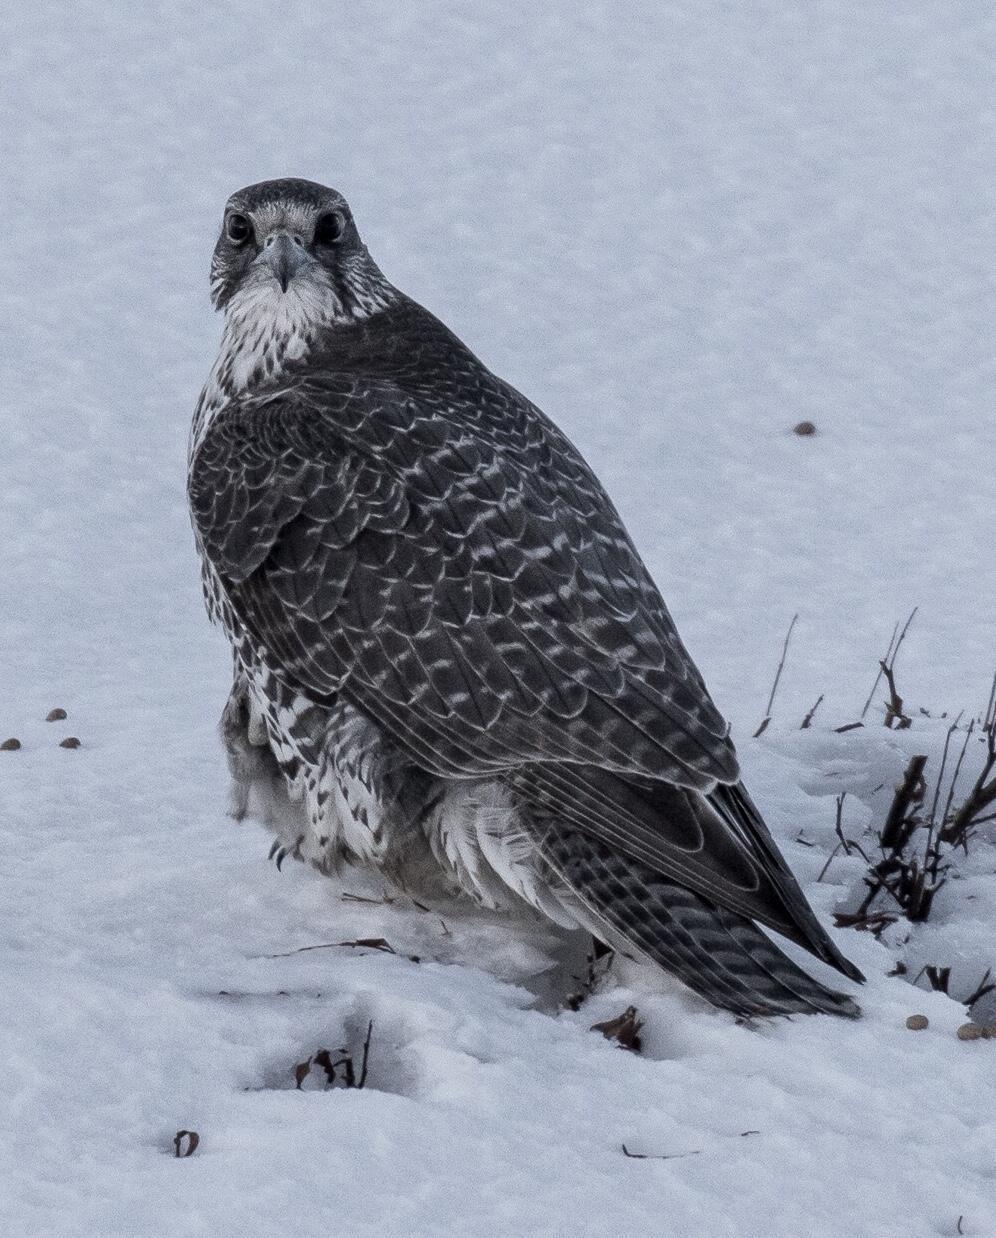 Gyrfalcon Photo by Kate Persons